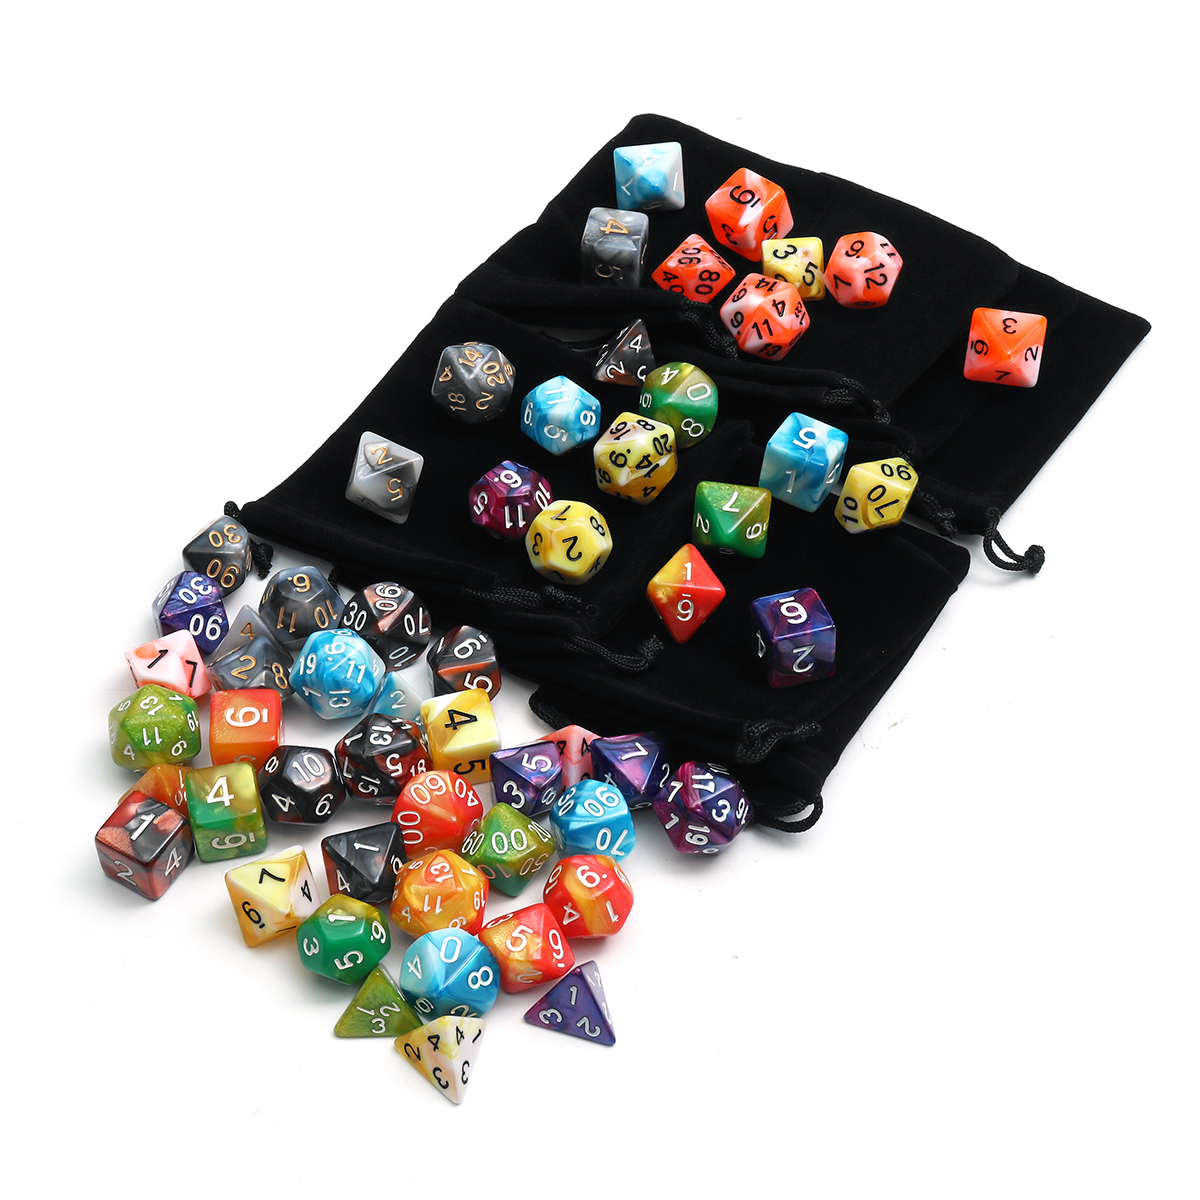 495670Pcs-Polyhedral-Dices-for-Dungeons--Dragons-Desktop-Games-With-Storage-Bags-1646830-9